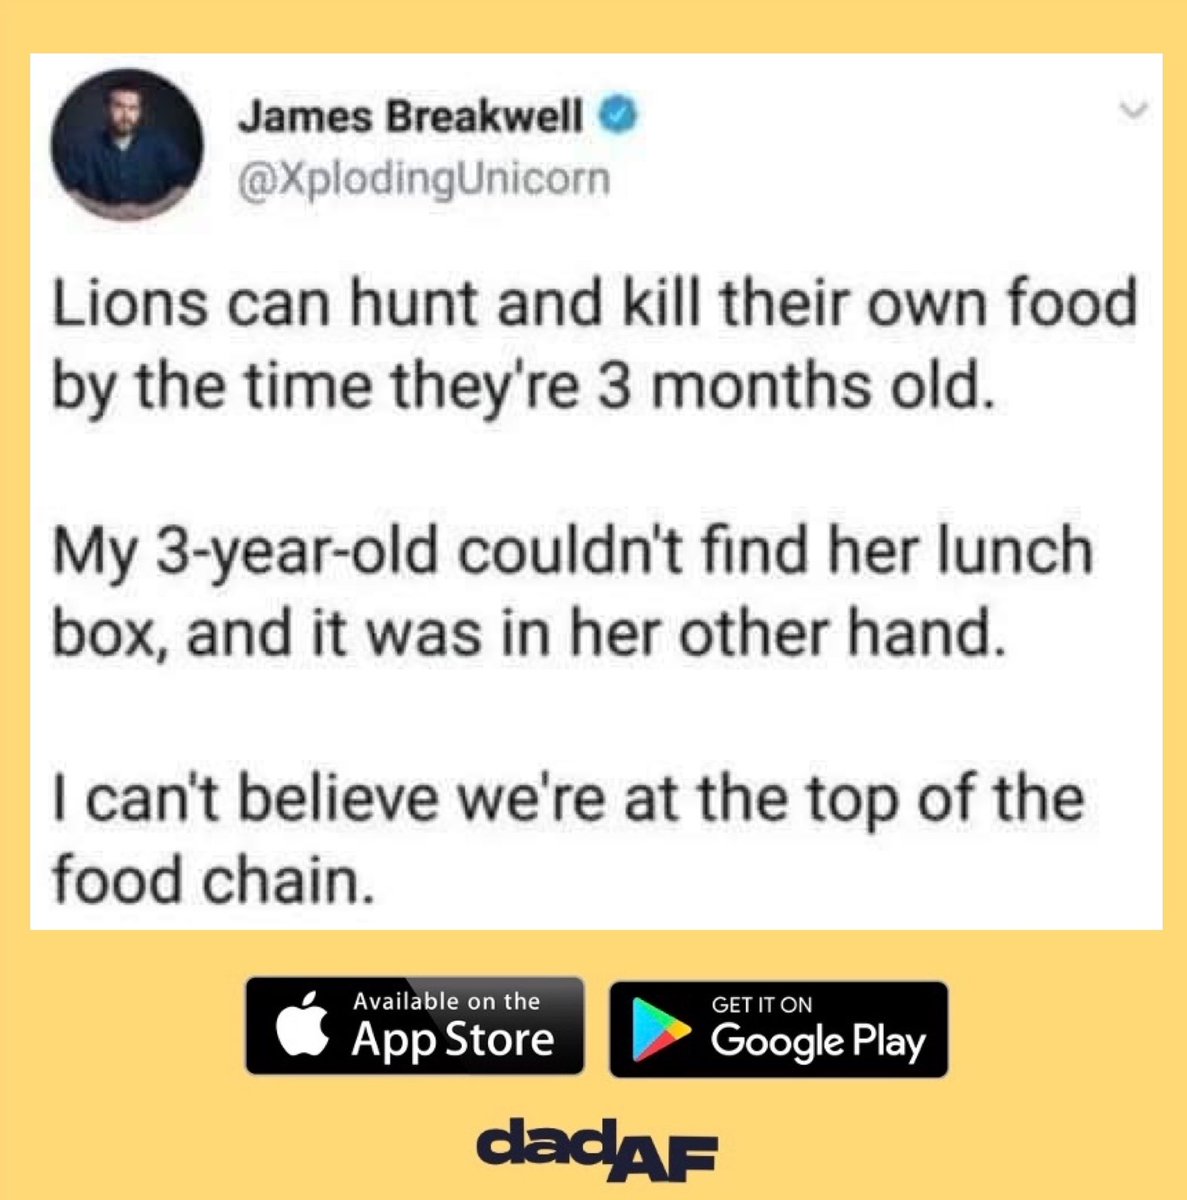 Got to love our little ones 😂
•
•
•
#dad #dadaf #dadlife #dads #lion #hunt #baby #child #toddler #lunchbox #lunch #smart #silly #forgetful #parenting #parentingproblems #toddlerproblems #parent #parenthood #gottolaugh #wearedadaf #dadyougotthis #lol #foodchain #topoffoodchain